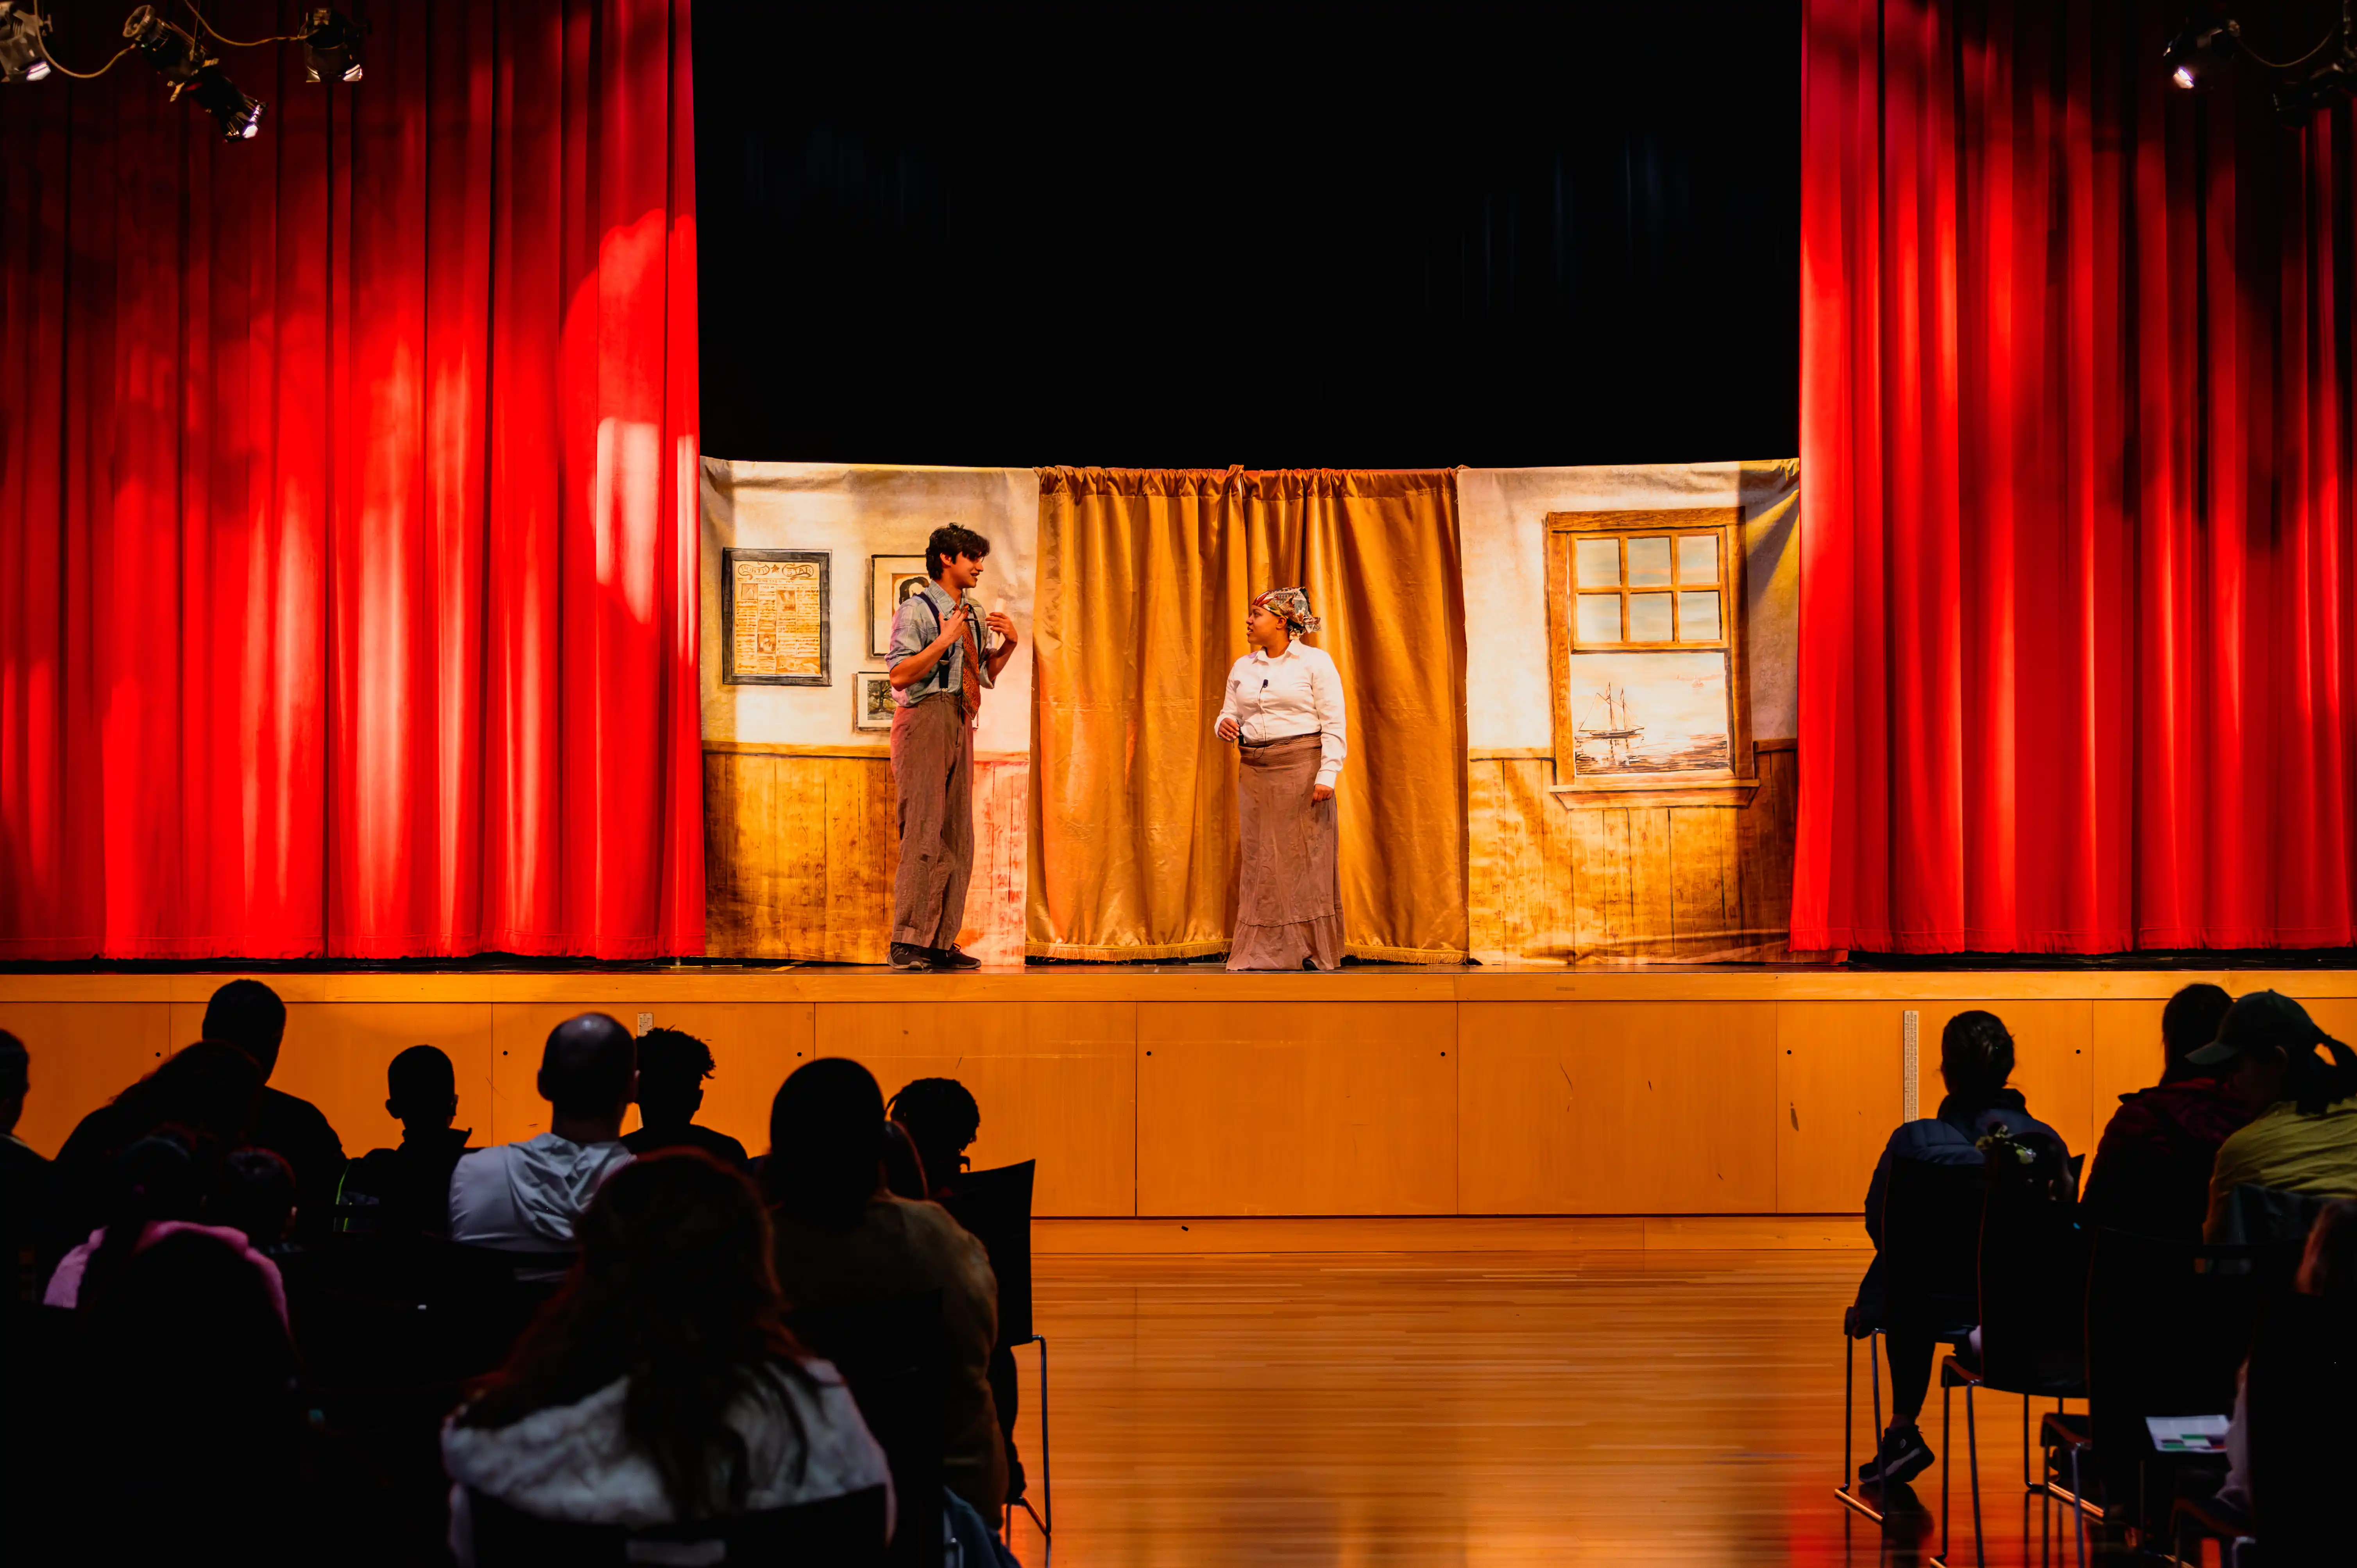 Two actors performing on a stage with red curtains in front of an audience.